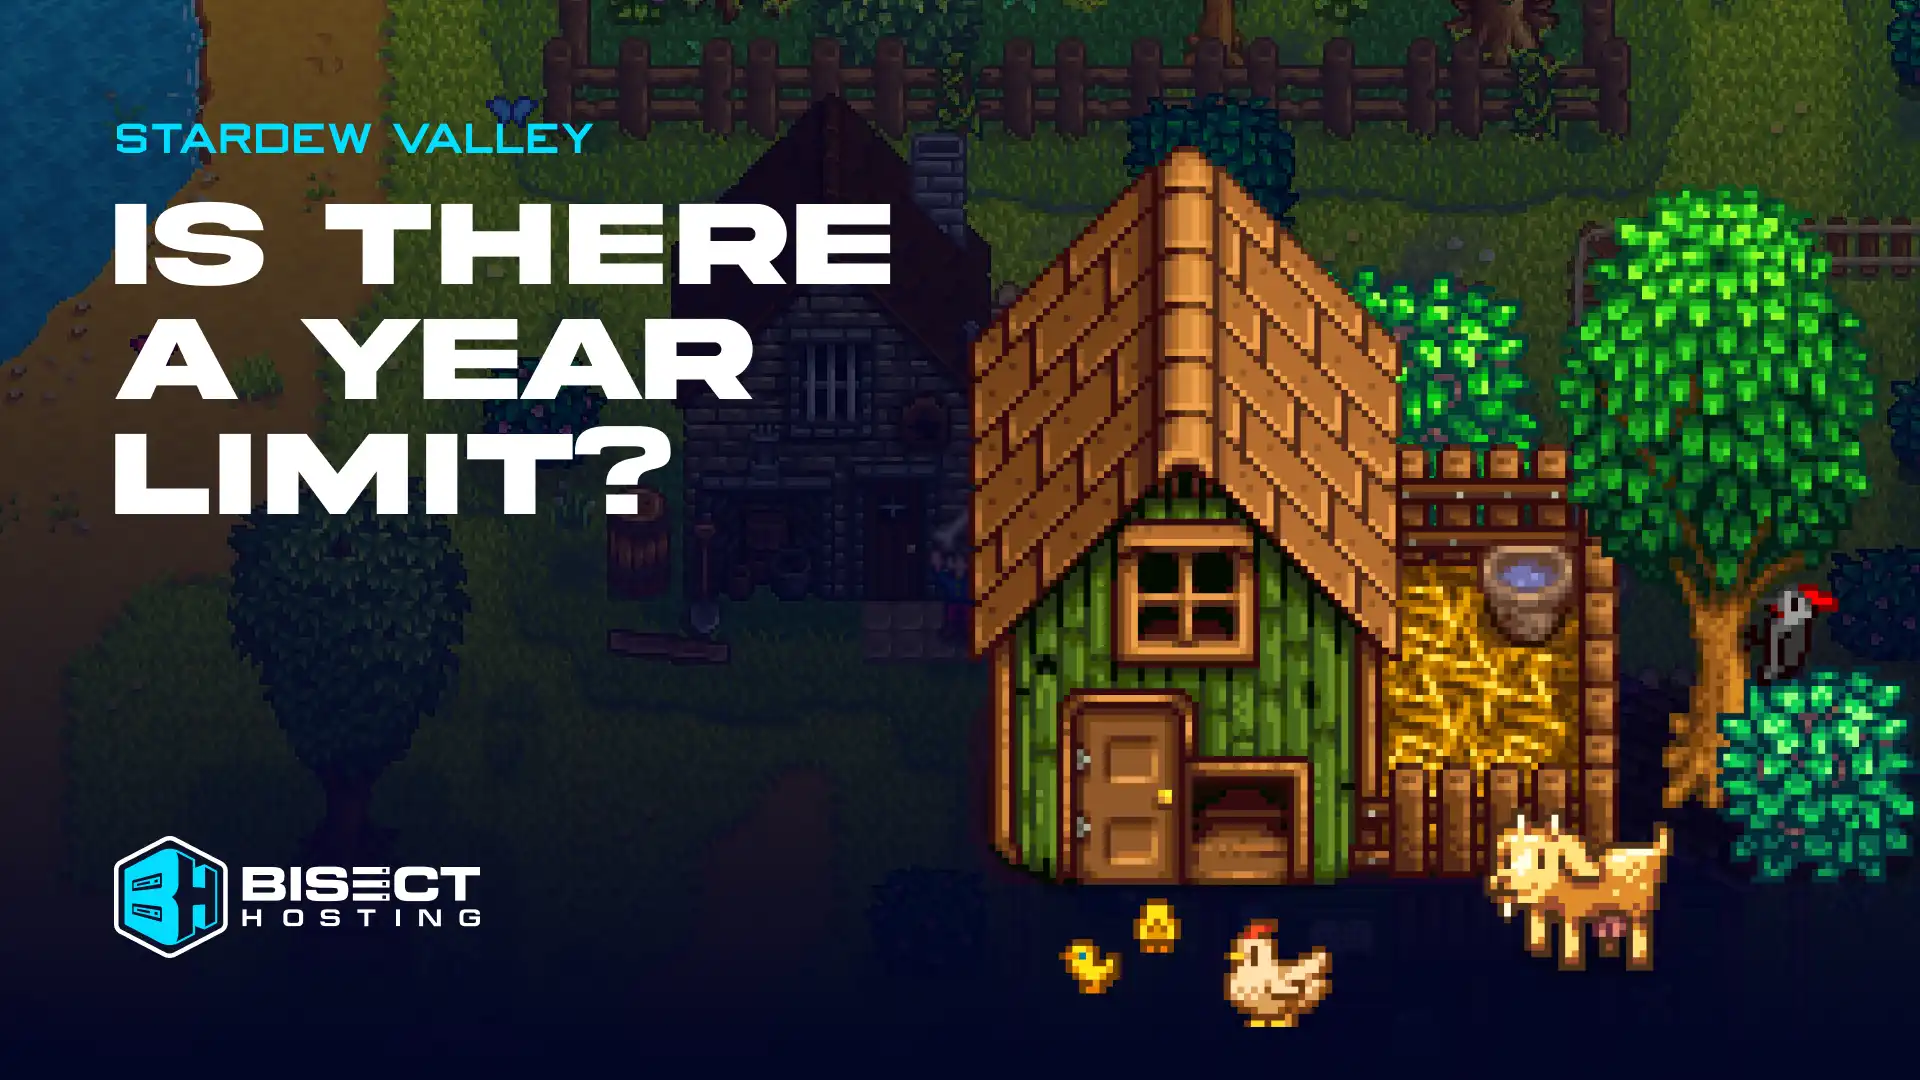 How Many Years Does Stardew Valley Last?